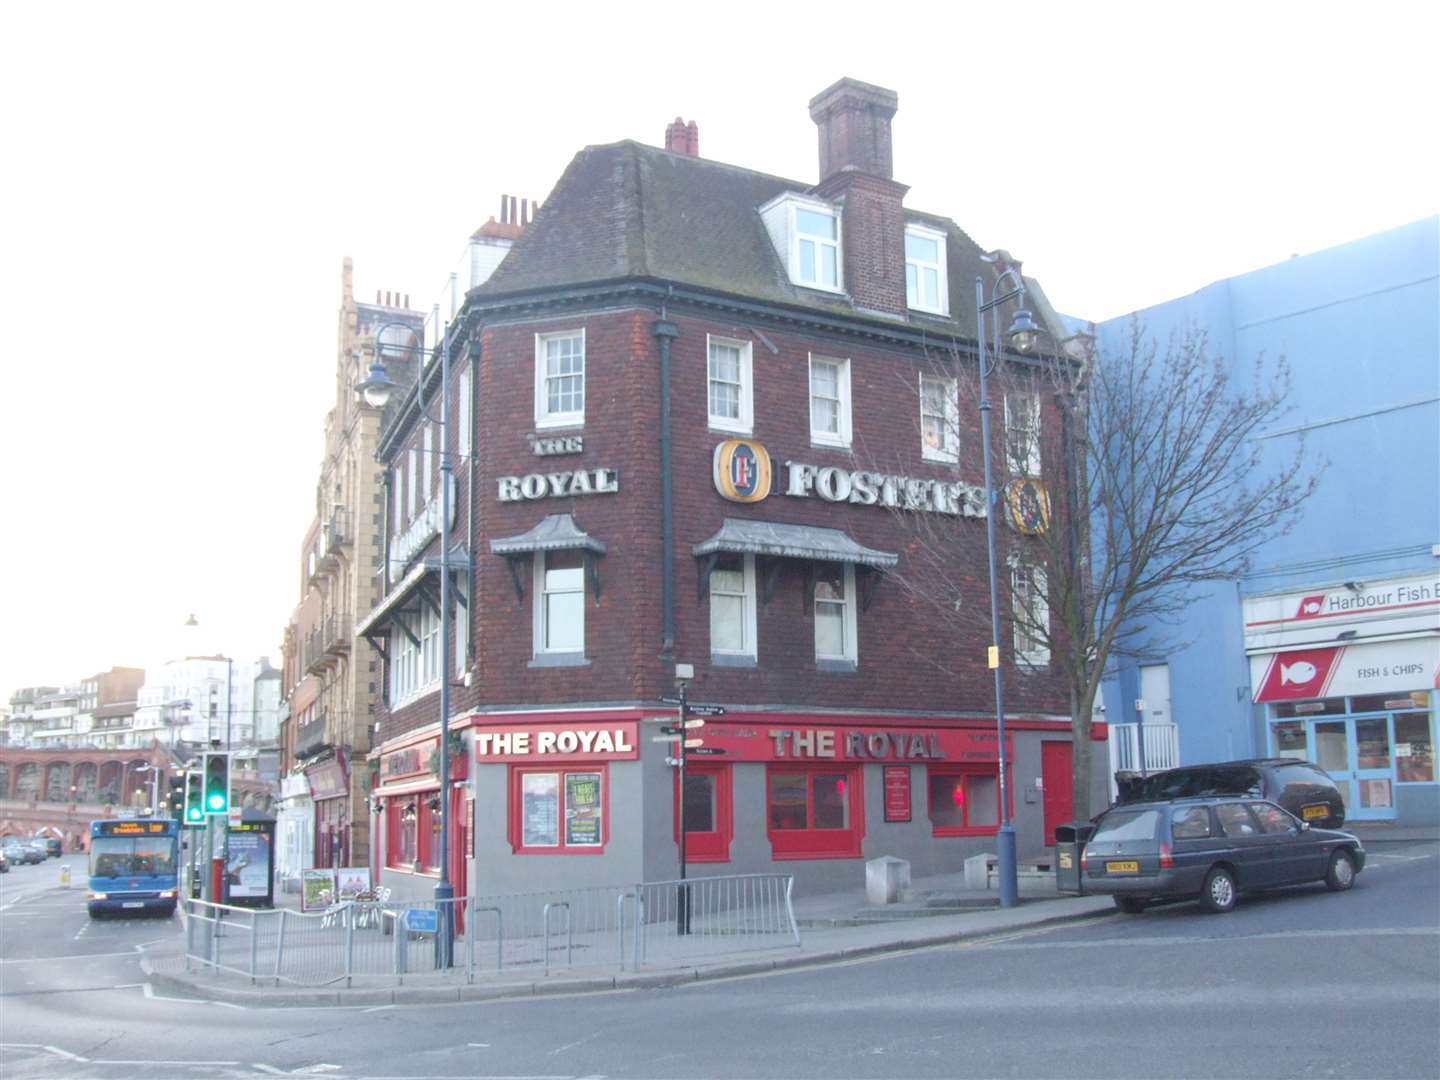 The Royal in Ramsgate pictured in 2016